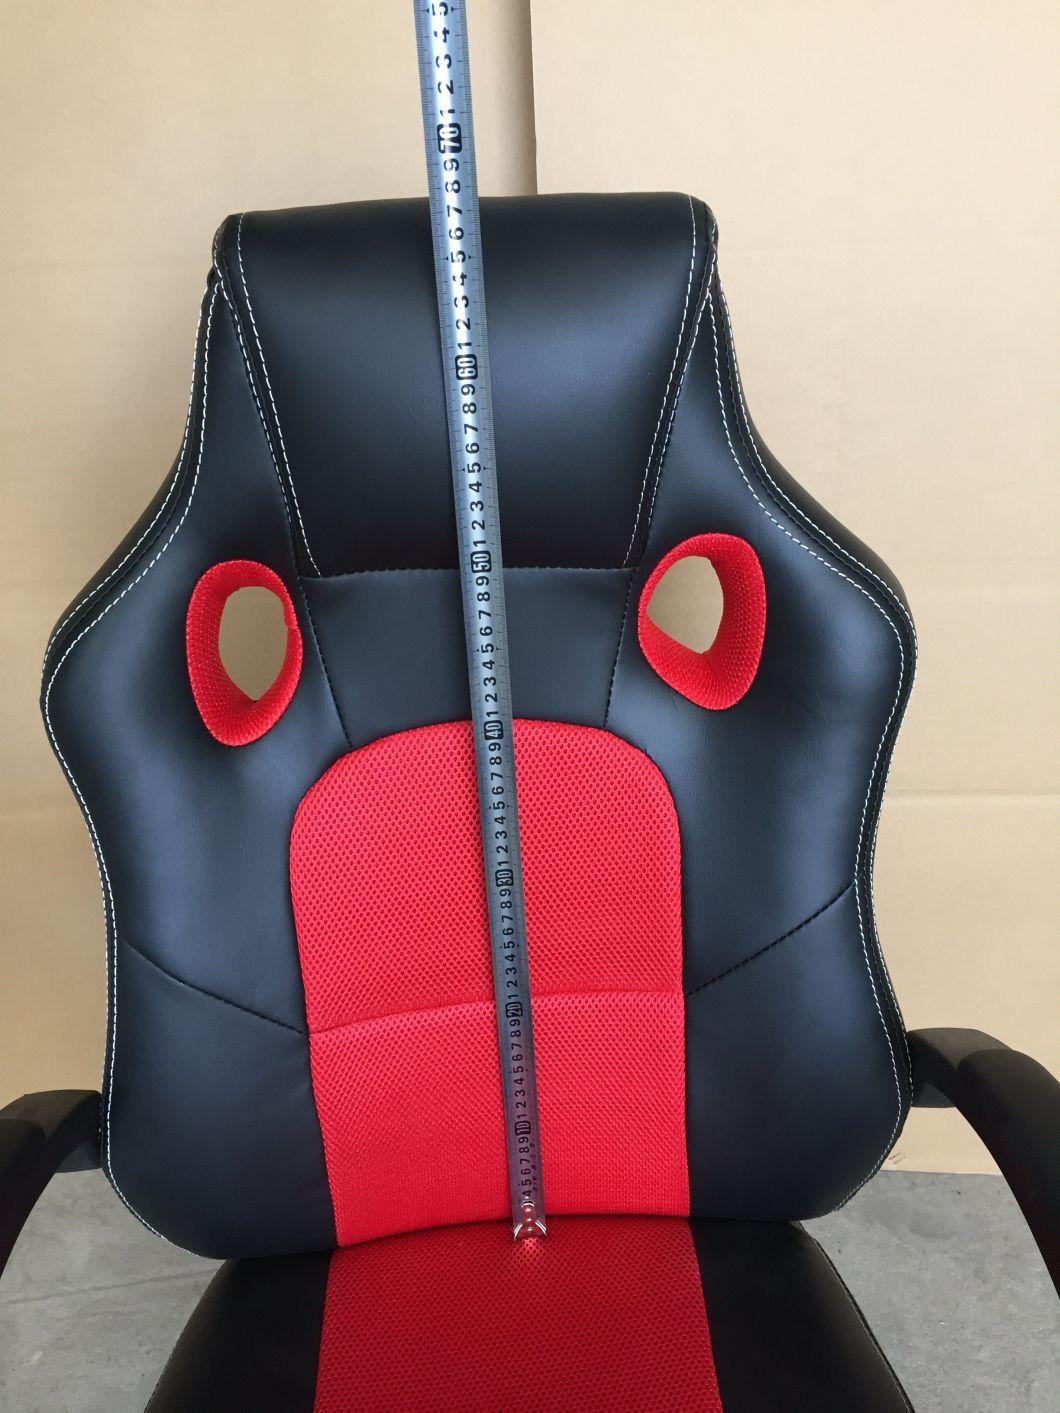 Modern Gaming Leather Office Chair